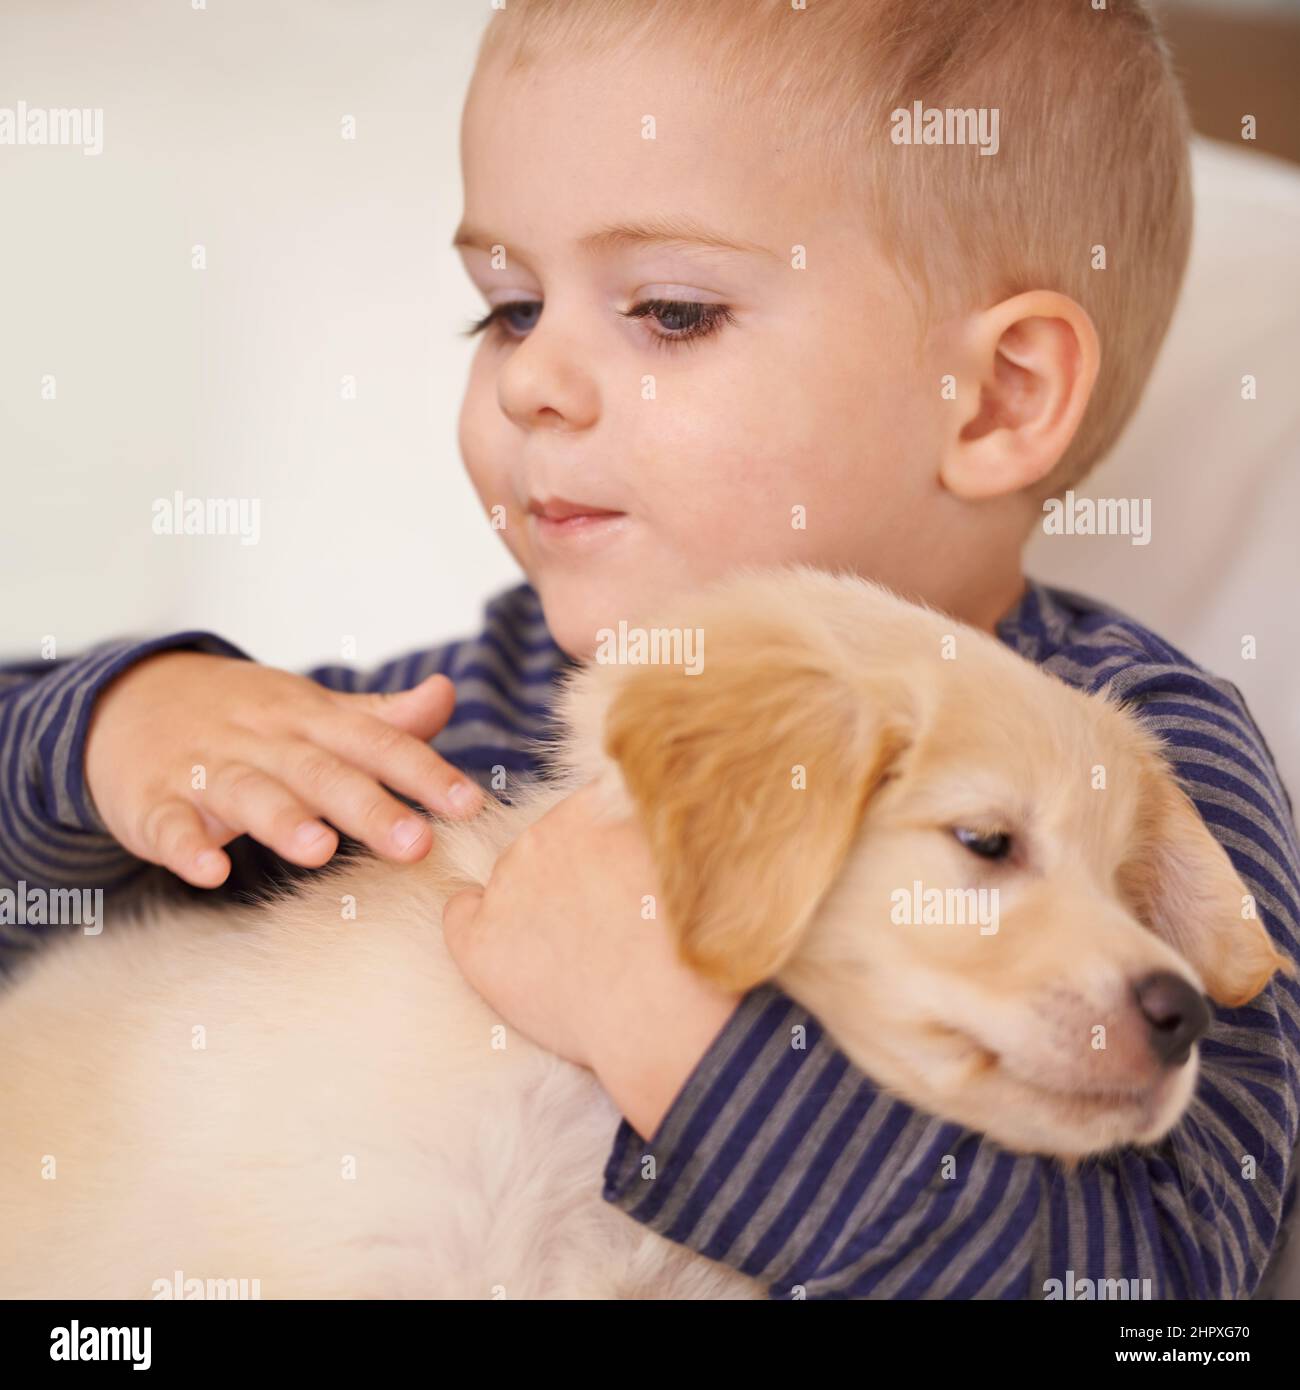 Being gentle with the new puppy. Closeup shot of a little boy petting a puppy. Stock Photo